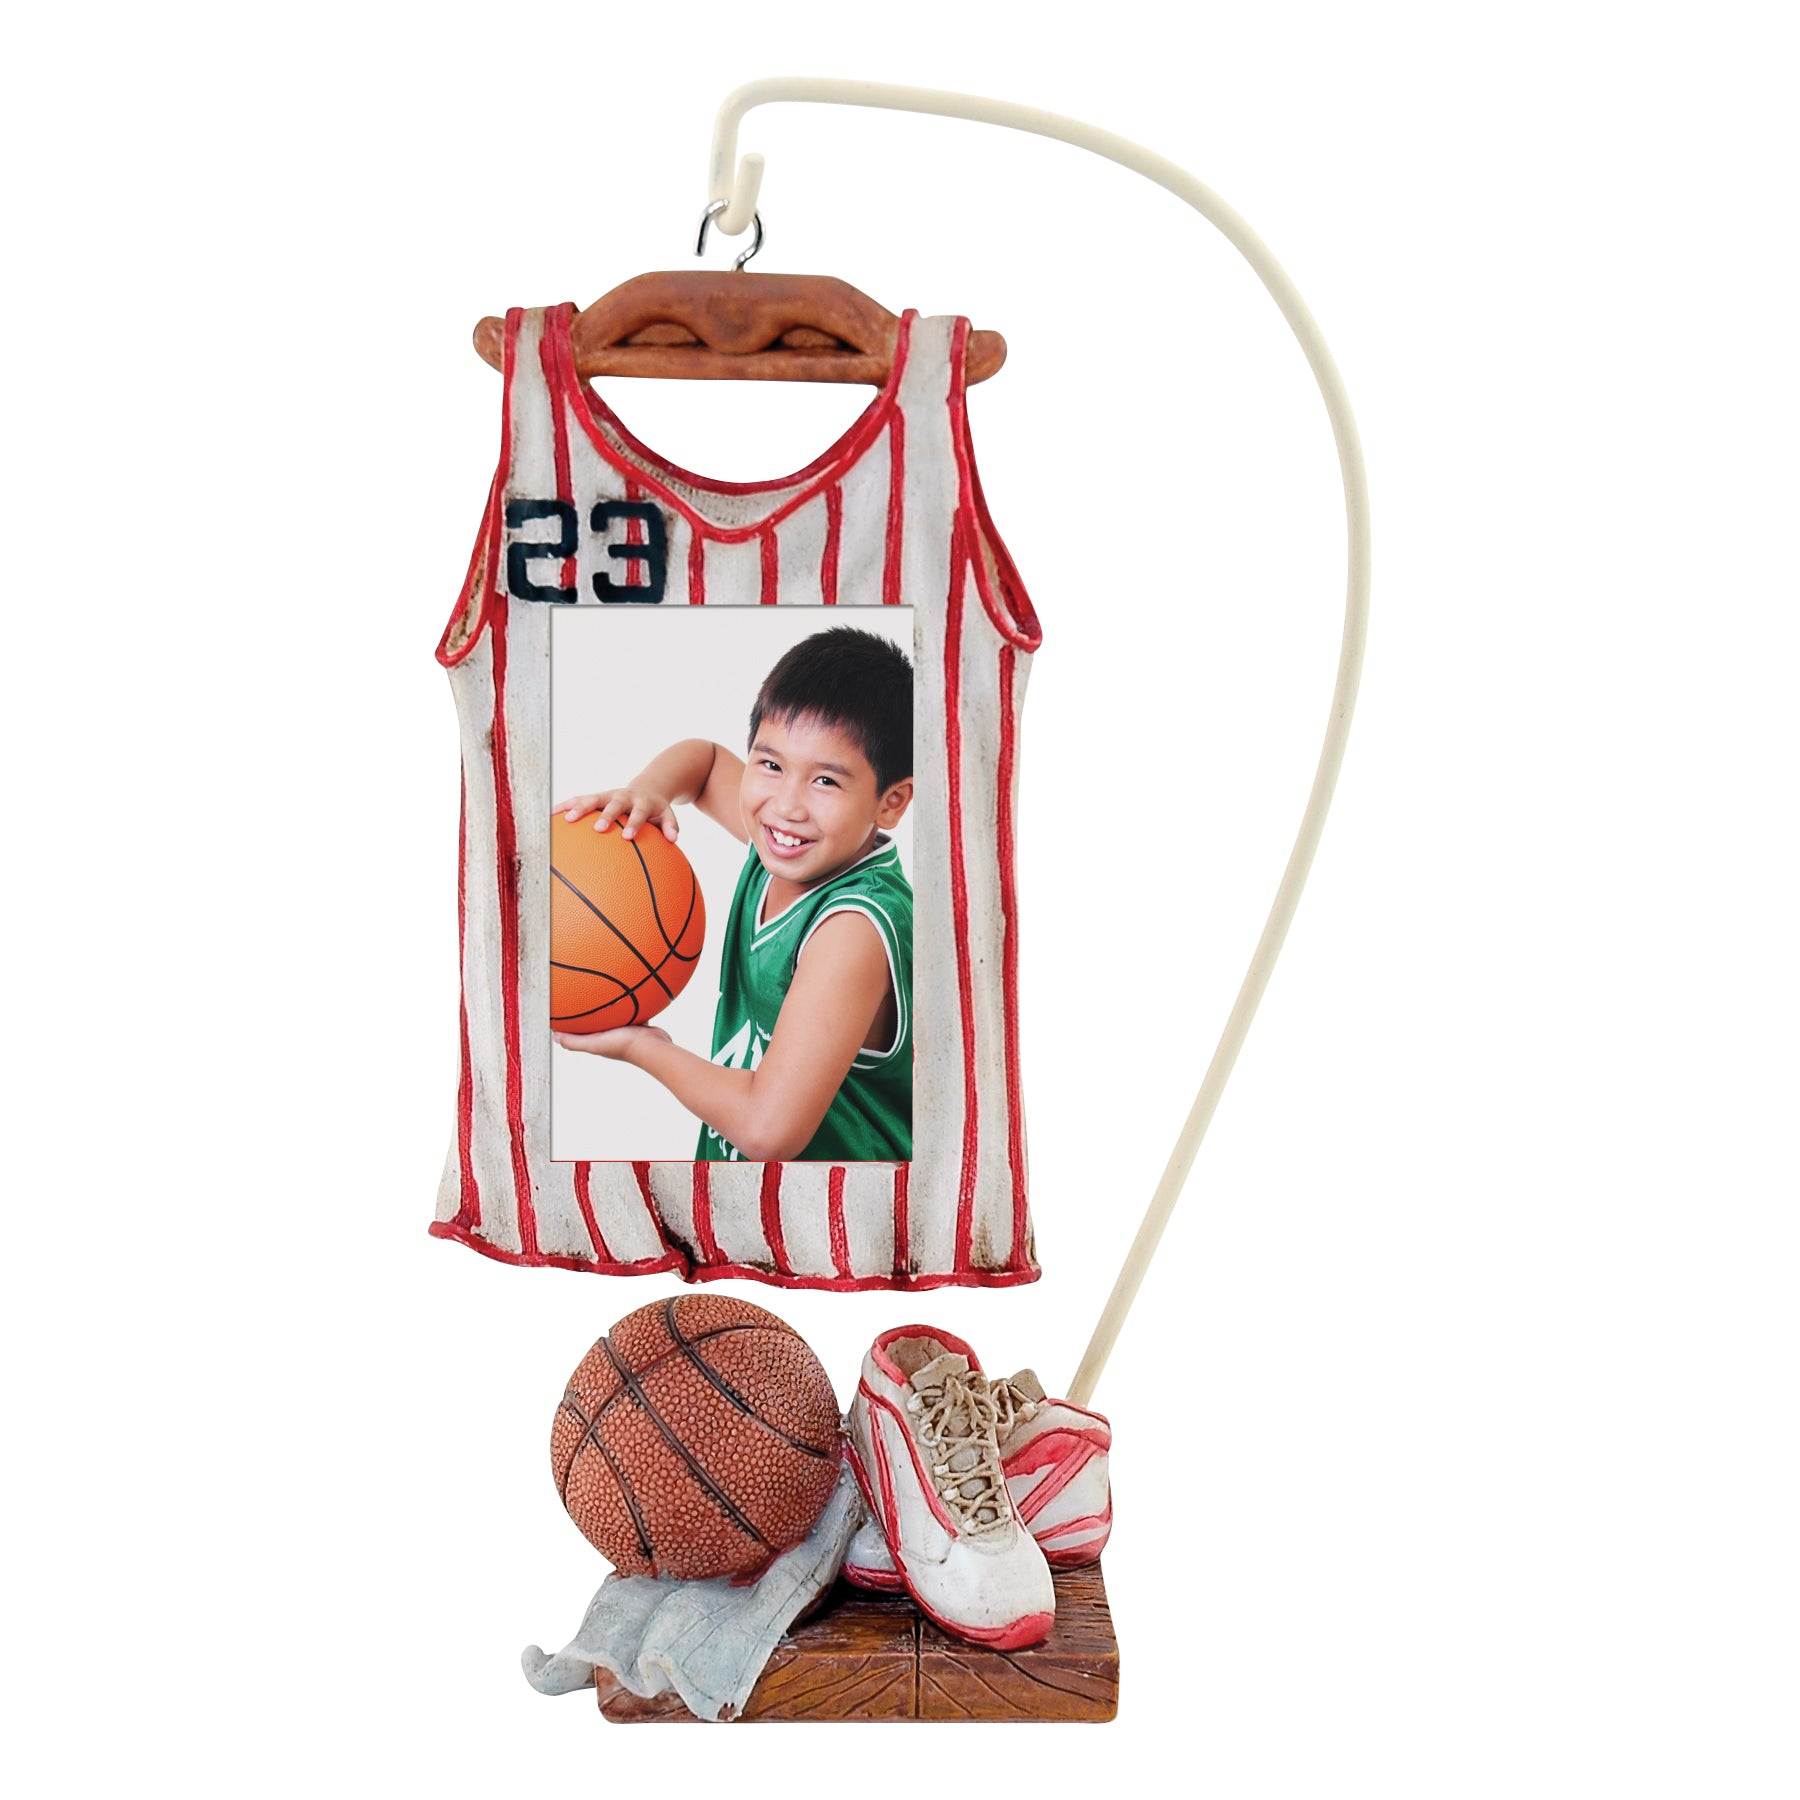 Sports Jersey Hanger Picture Frames